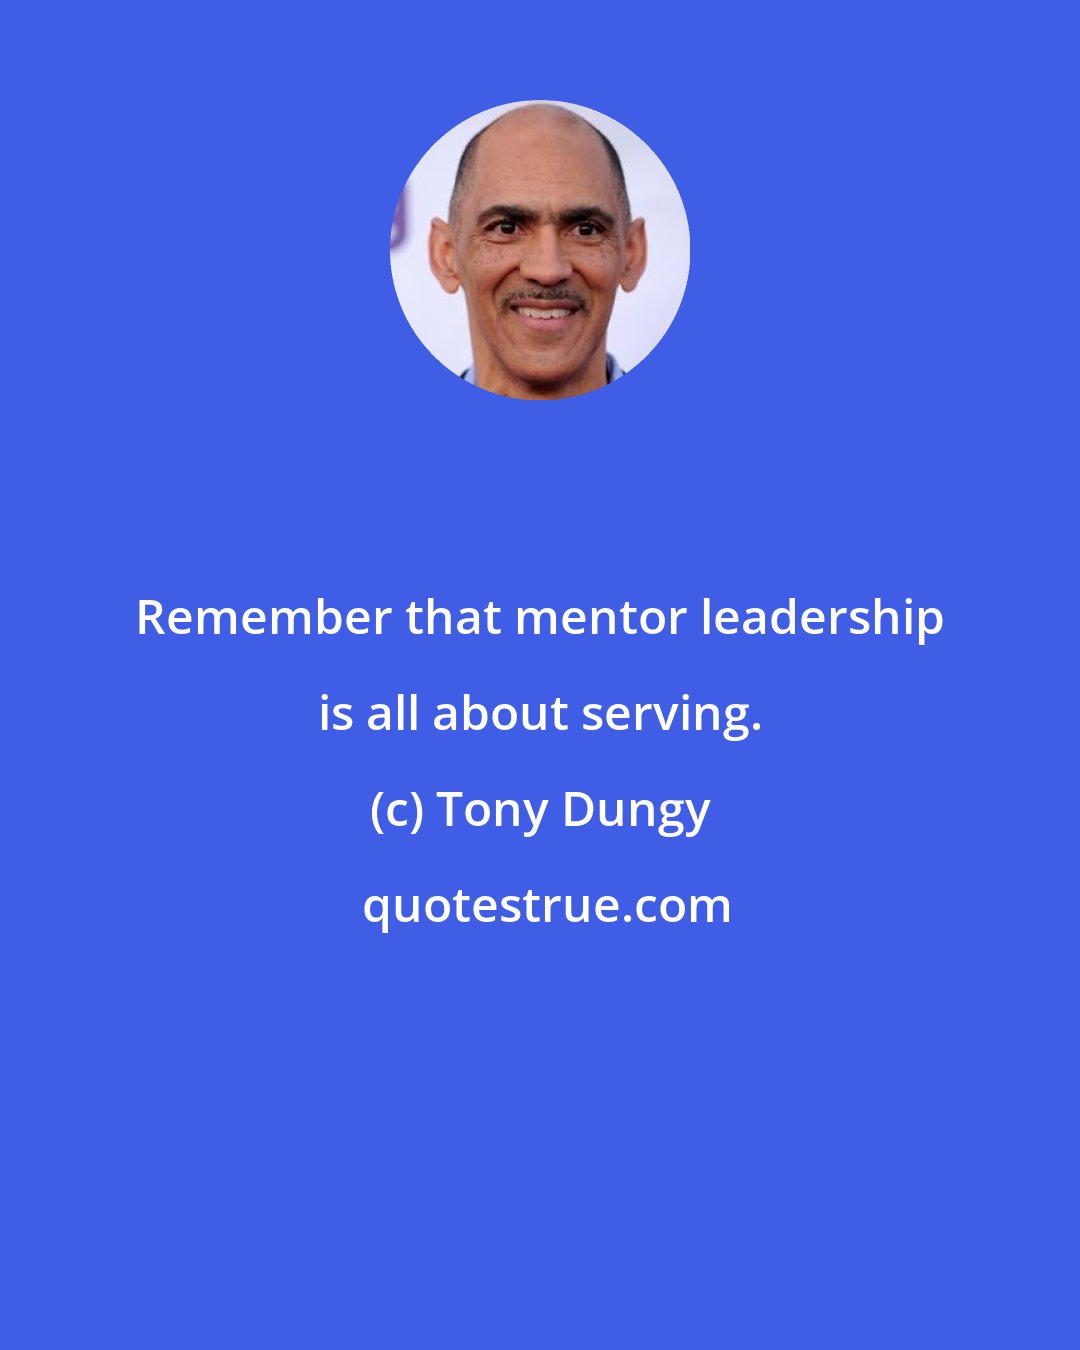 Tony Dungy: Remember that mentor leadership is all about serving.